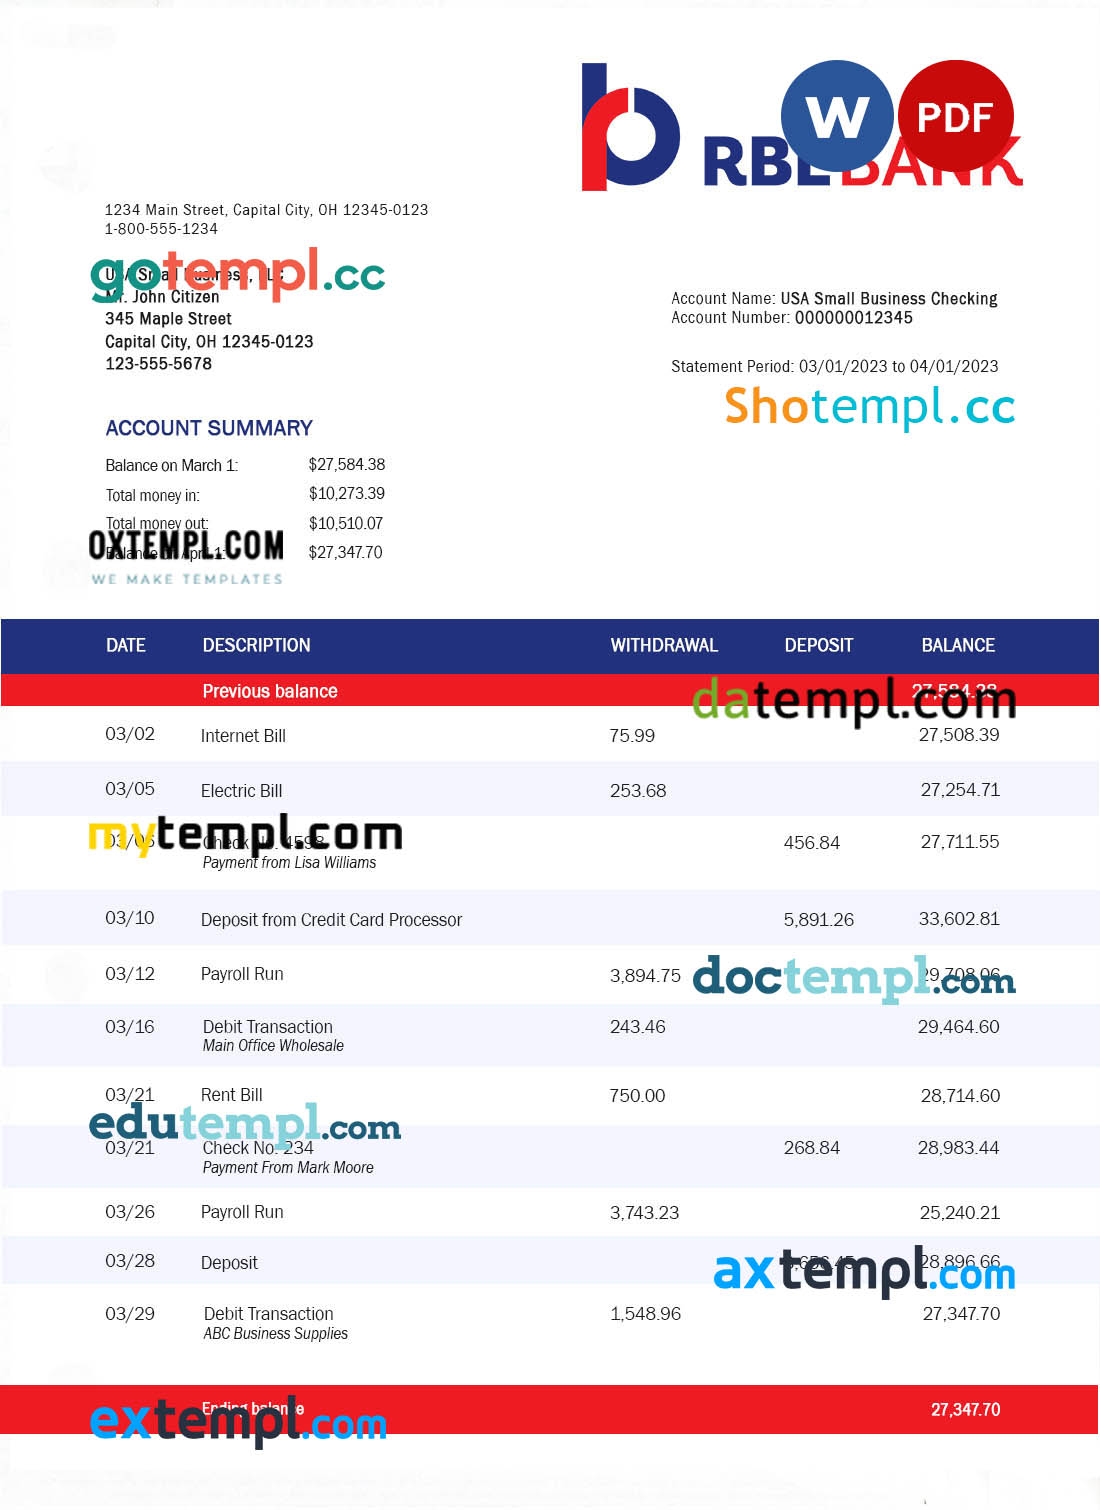 editable template, RBL Bank enterprise account statement Word and PDF template